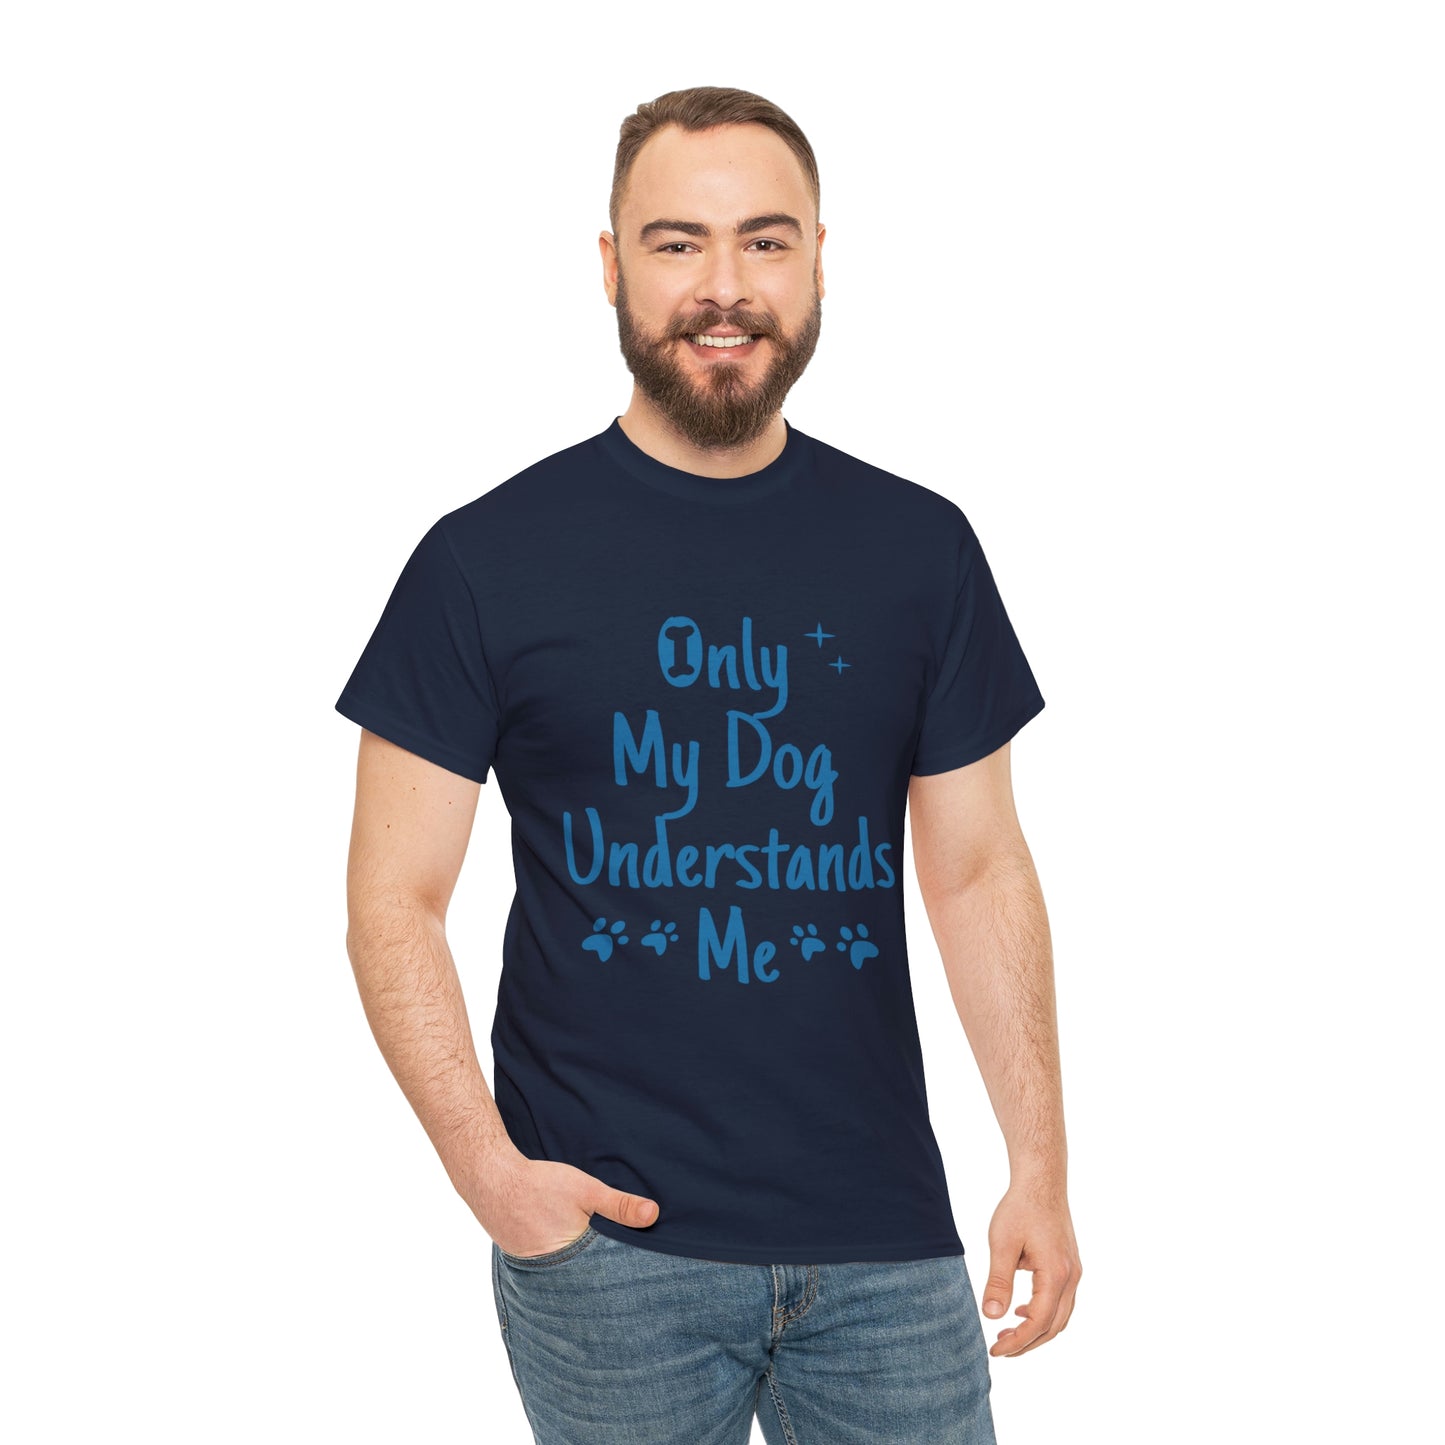 Only My Dog Understands Me Tee